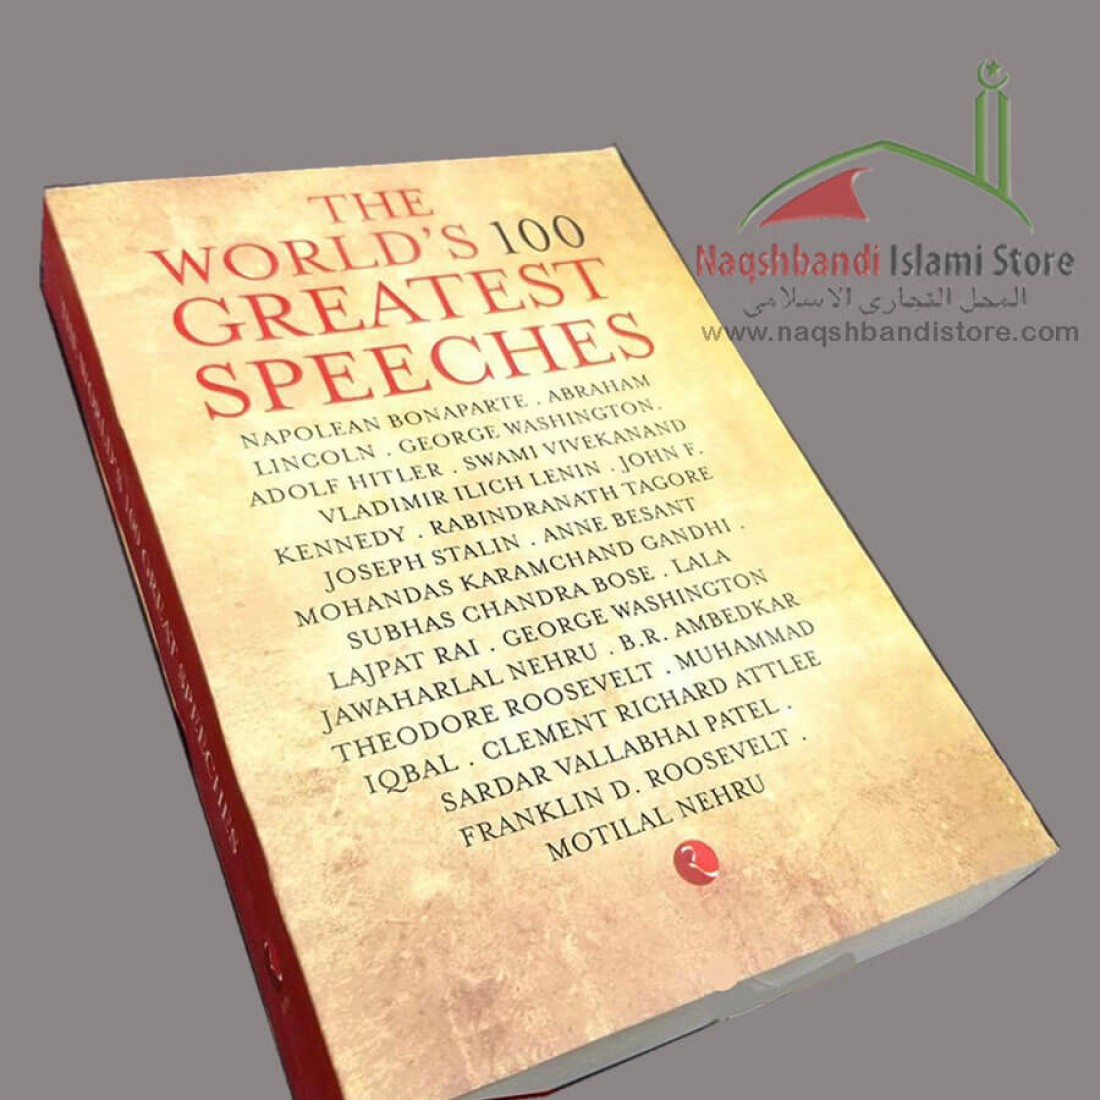 100 greatest speeches book pdf free download